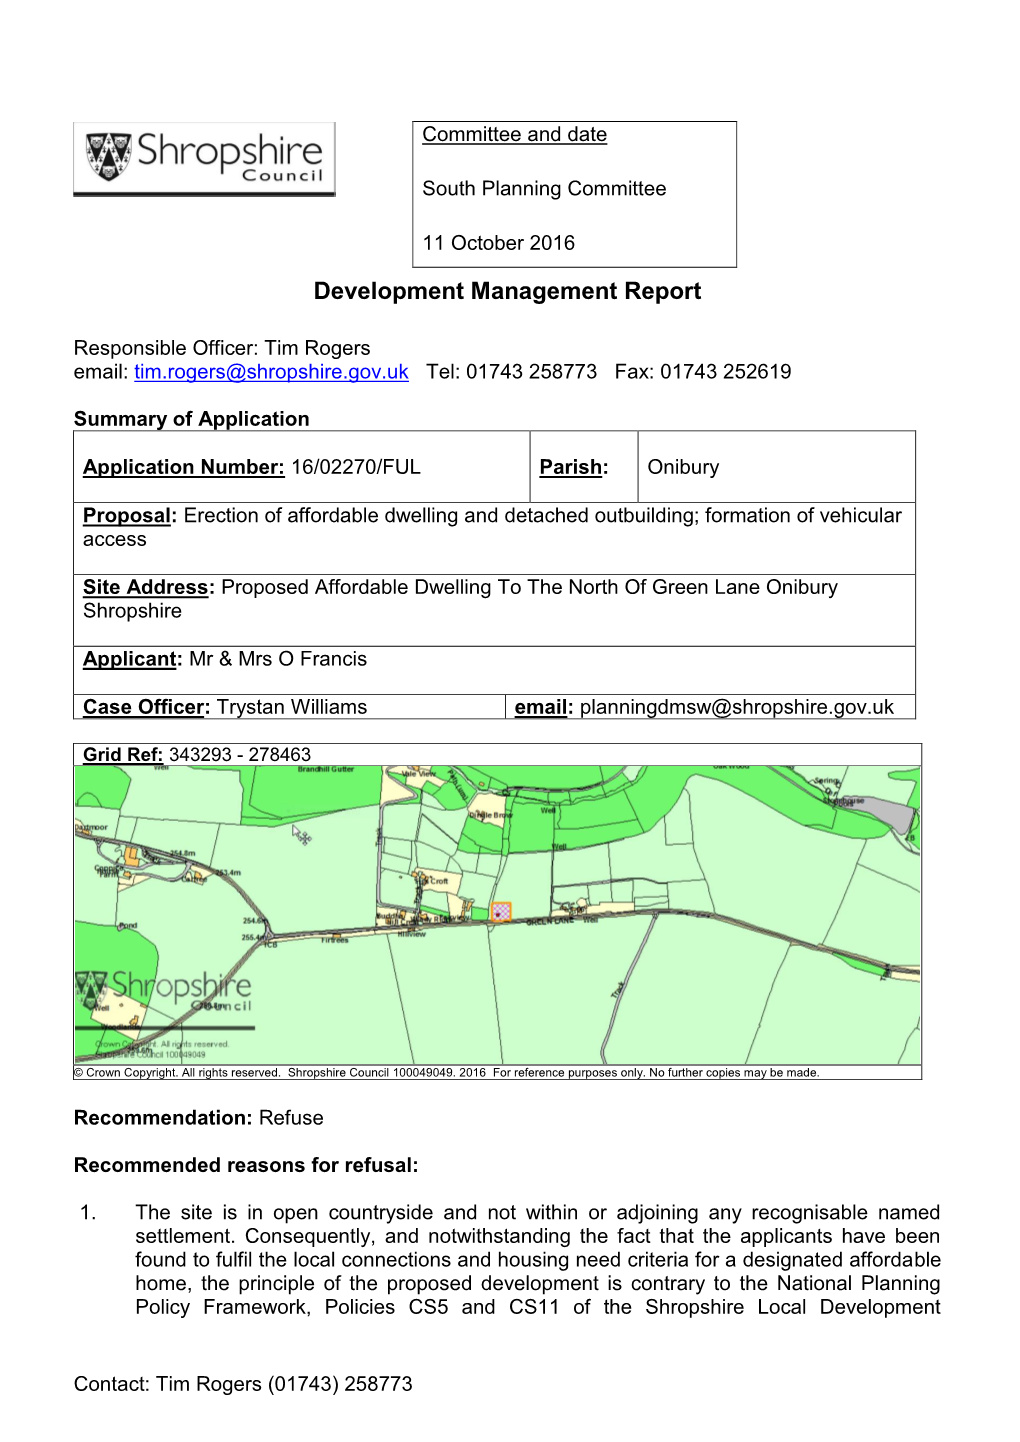 Proposed Affordable Dwelling to the North of Green Lane Onibury Shropshire